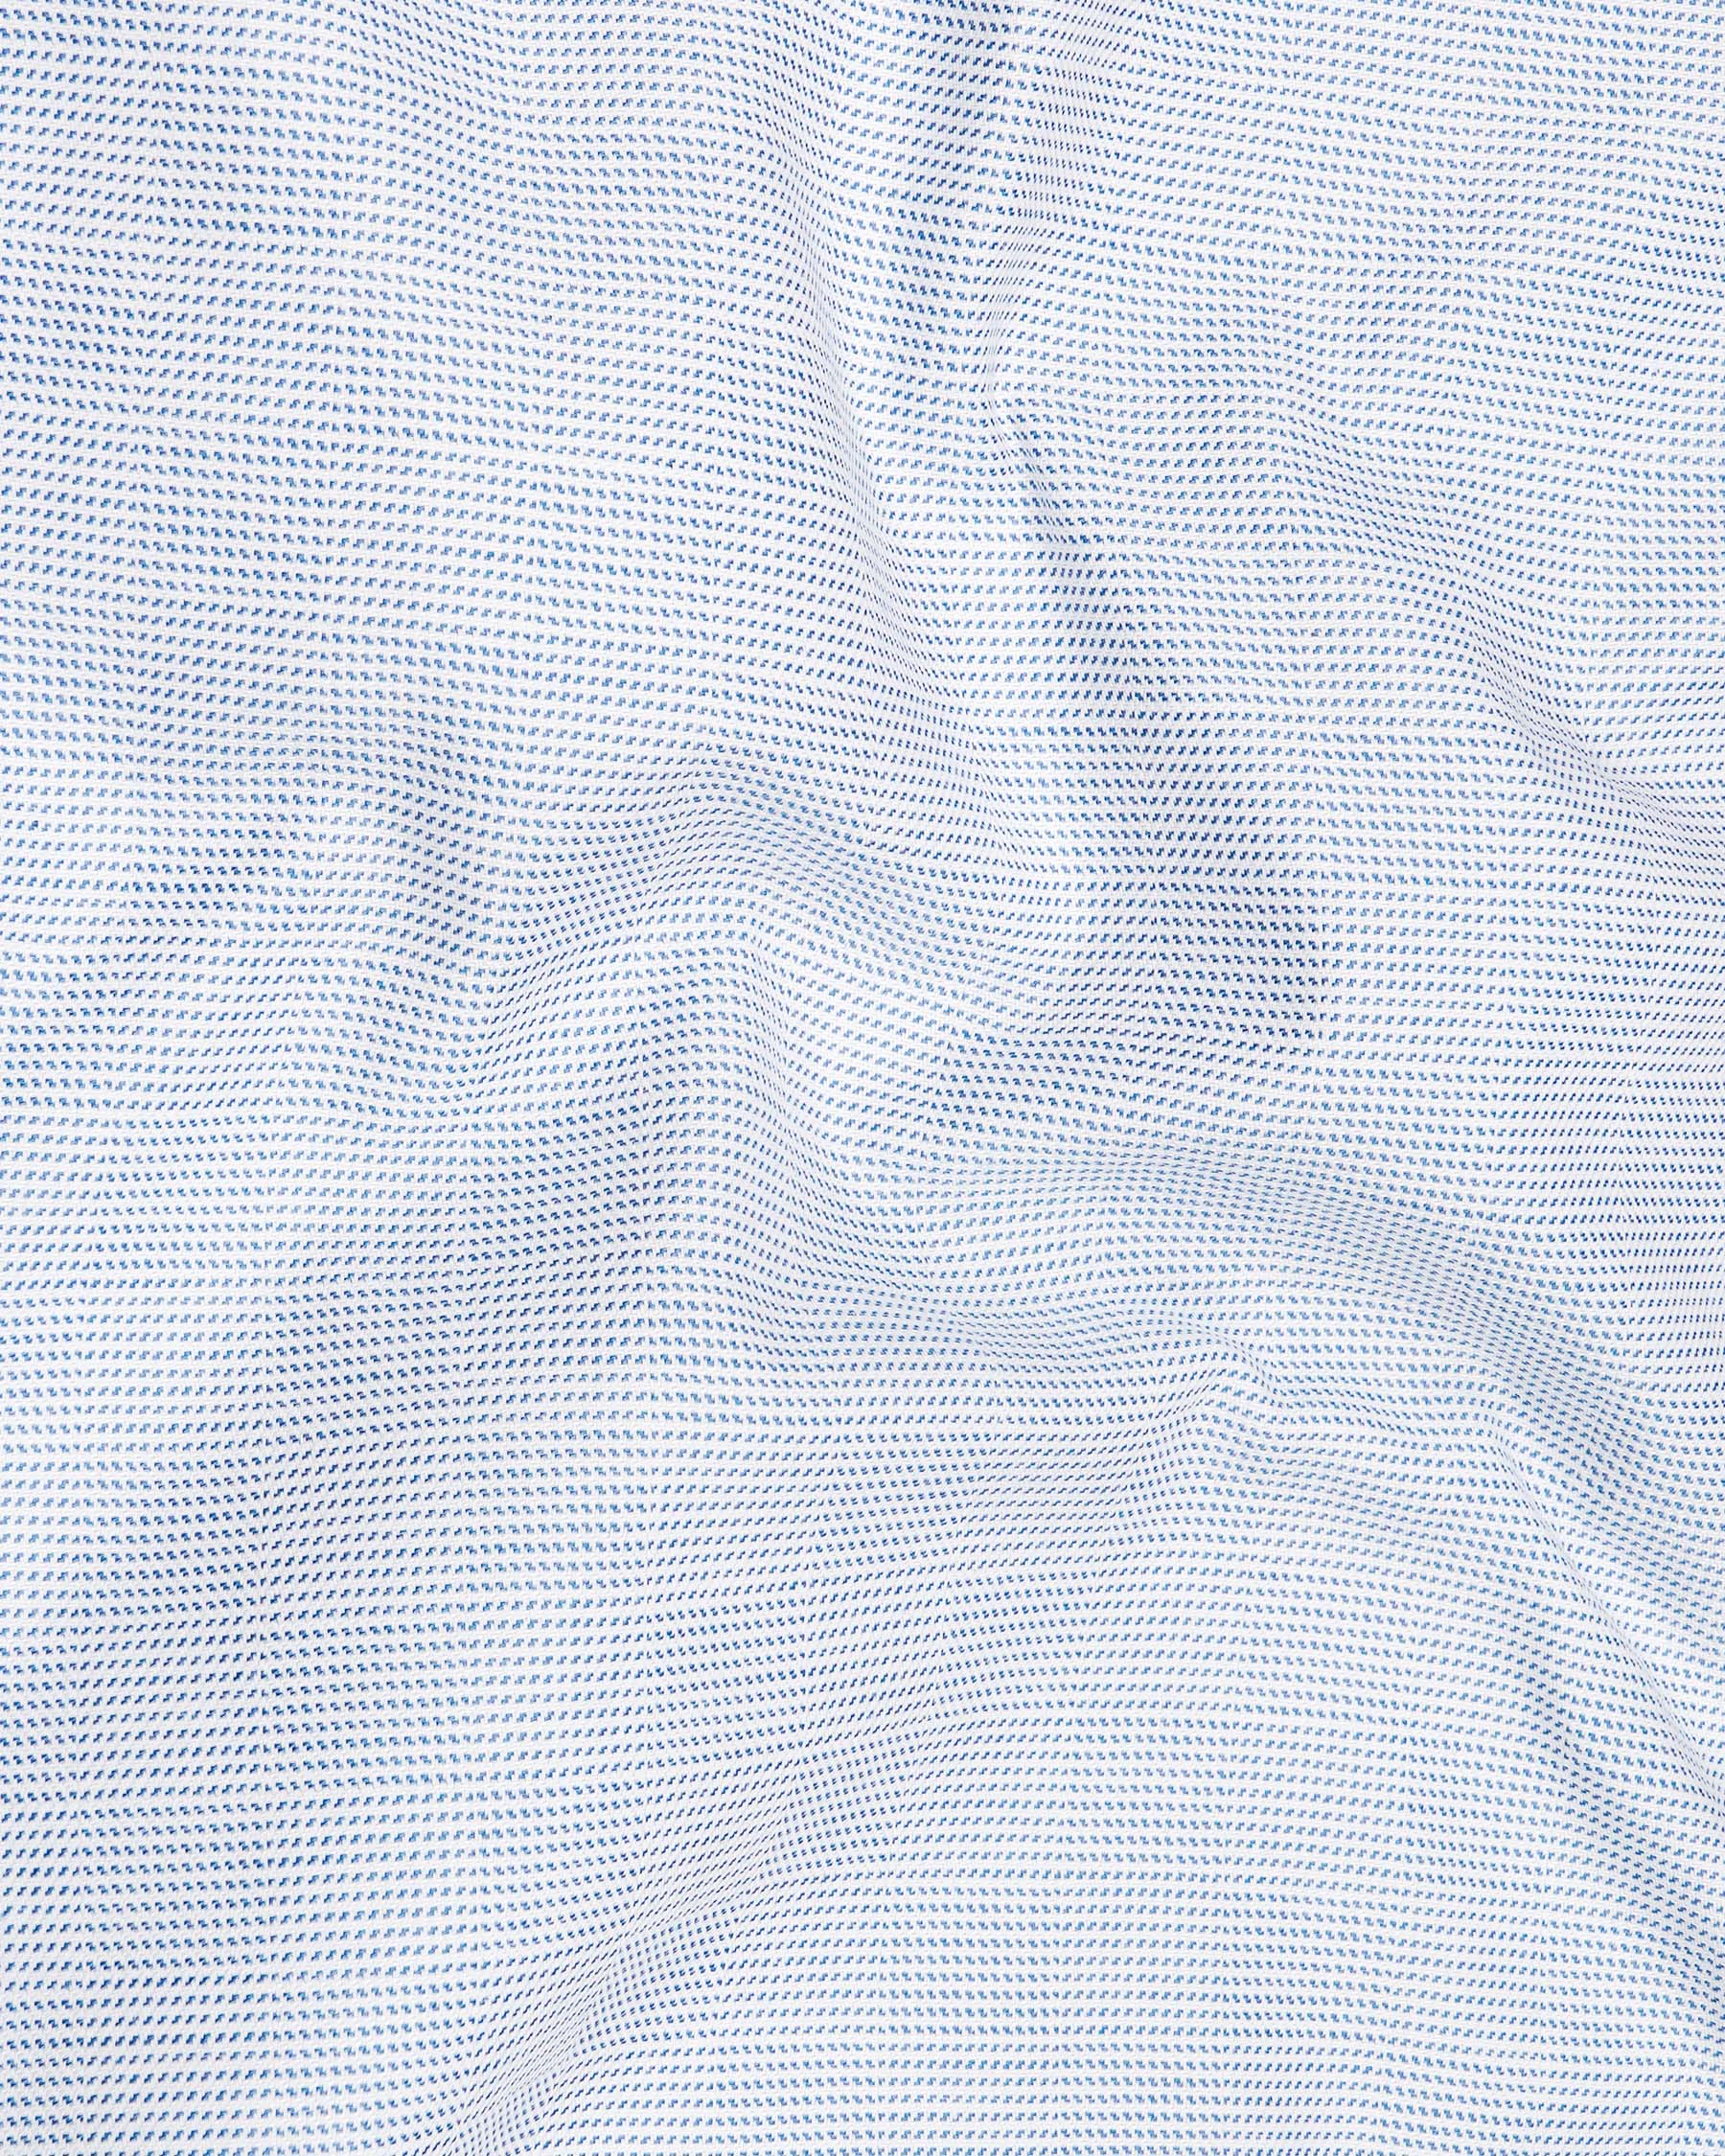 Ship Cove Blue and White Dobby Textured Premium Giza Cotton Shirt 7956-BD-38,7956-BD-H-38,7956-BD-39,7956-BD-H-39,7956-BD-40,7956-BD-H-40,7956-BD-42,7956-BD-H-42,7956-BD-44,7956-BD-H-44,7956-BD-46,7956-BD-H-46,7956-BD-48,7956-BD-H-48,7956-BD-50,7956-BD-H-50,7956-BD-52,7956-BD-H-52